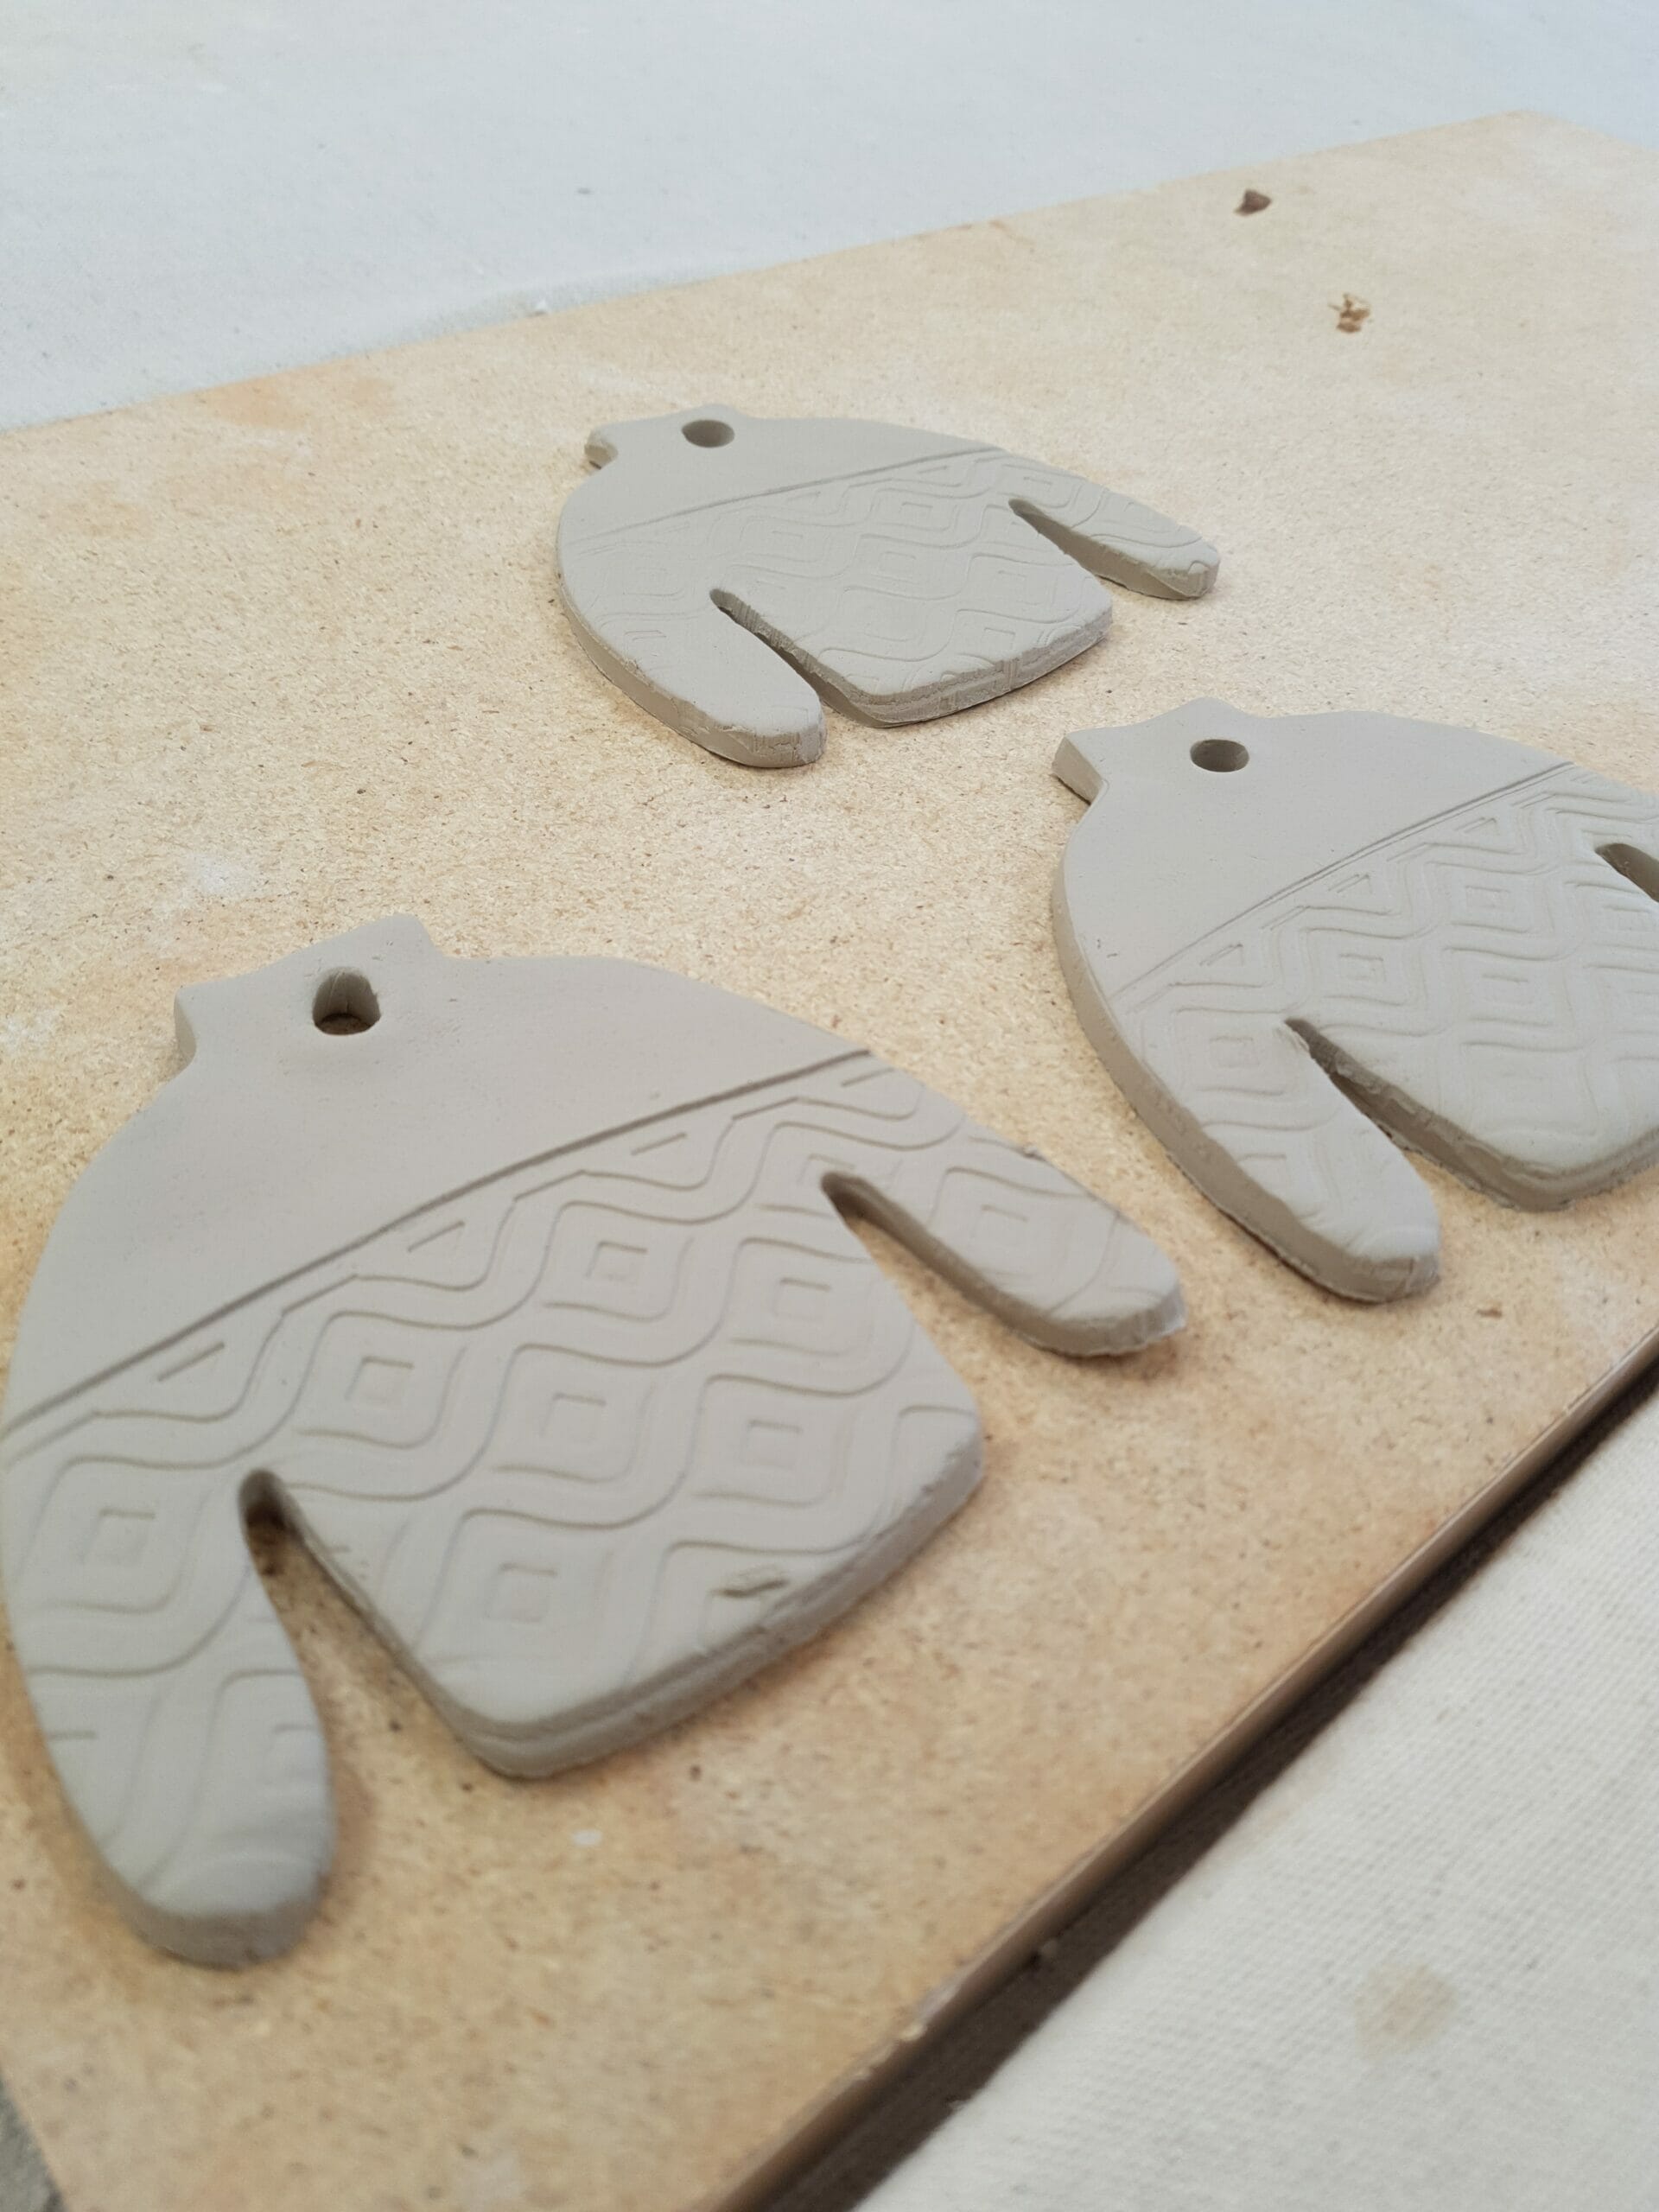 Three ugly sweater ornaments lie on a table before being glazed and fired